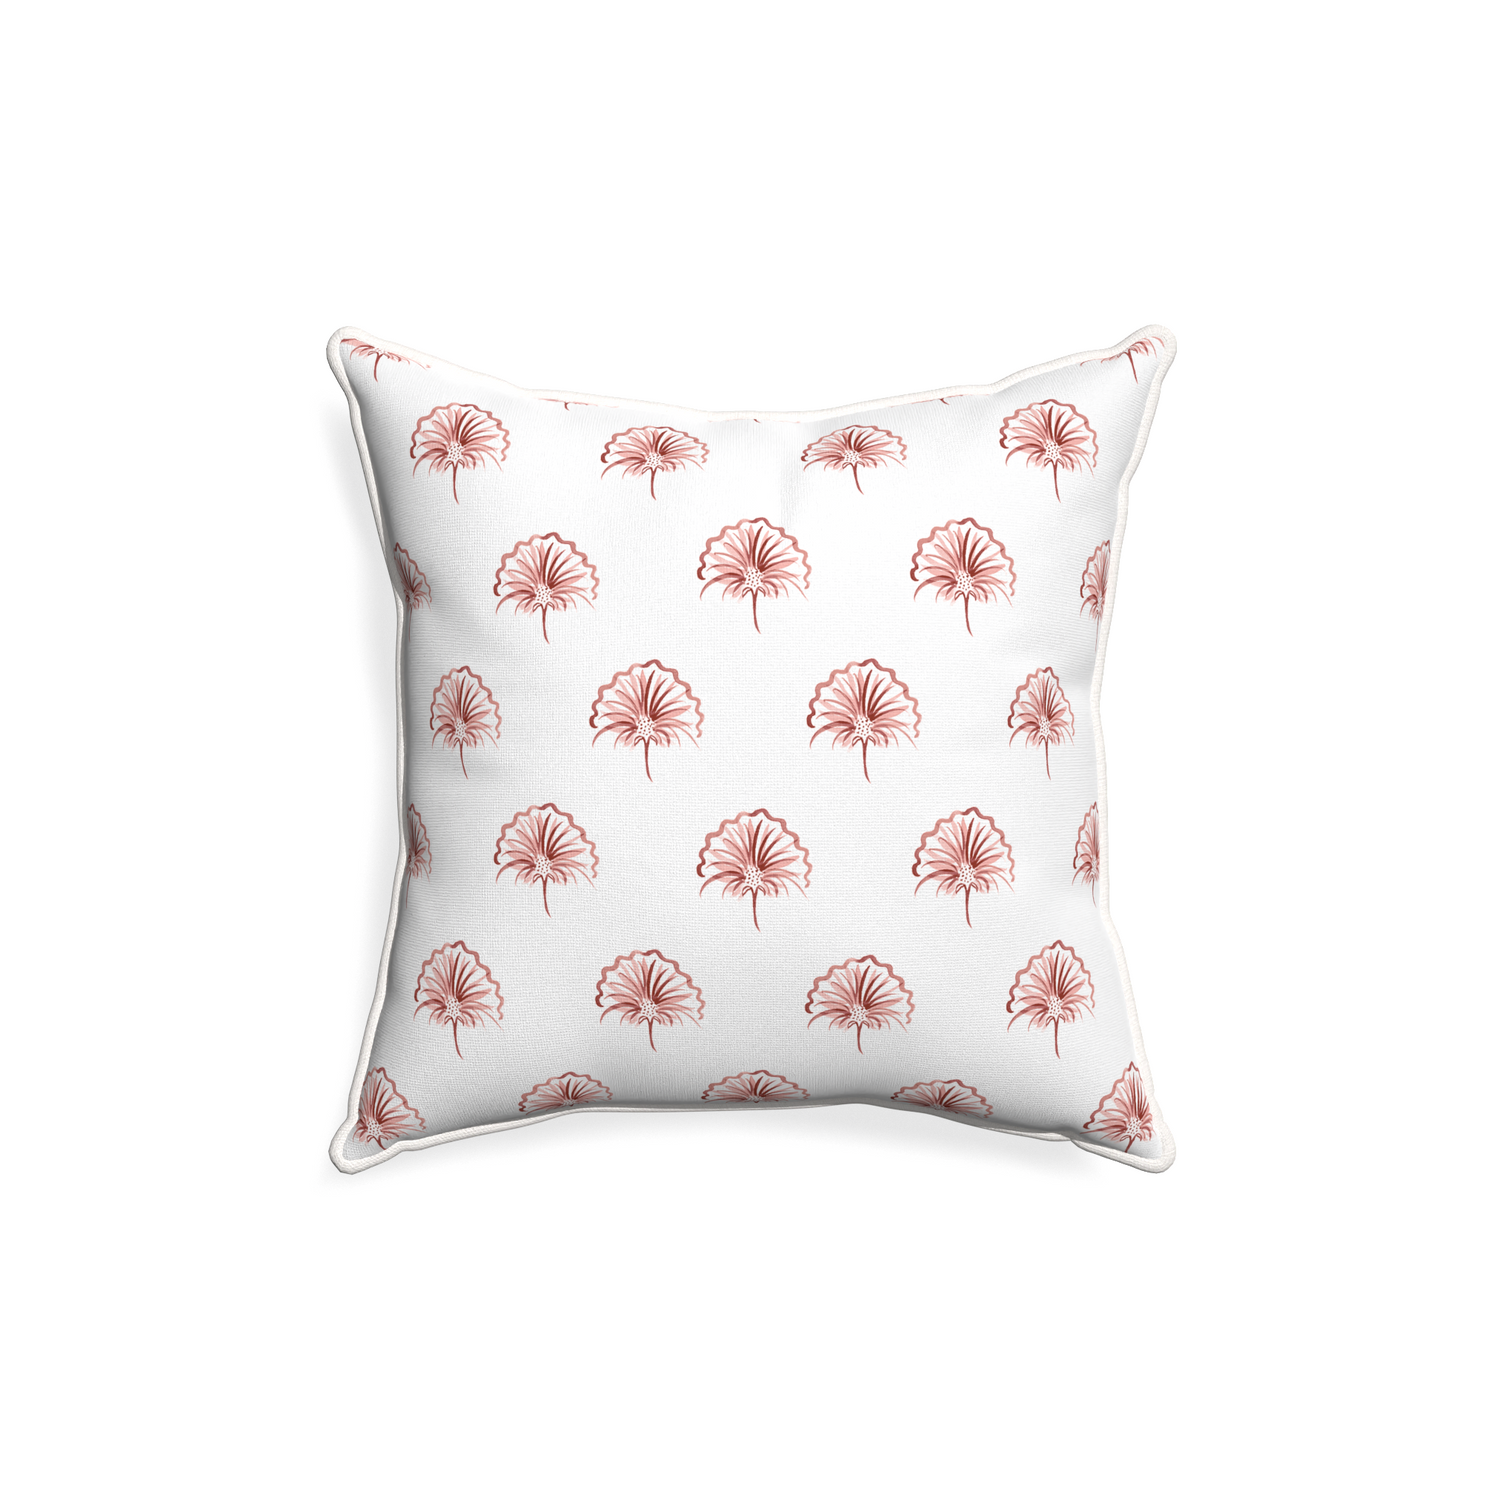 18-square penelope rose custom floral pinkpillow with snow piping on white background